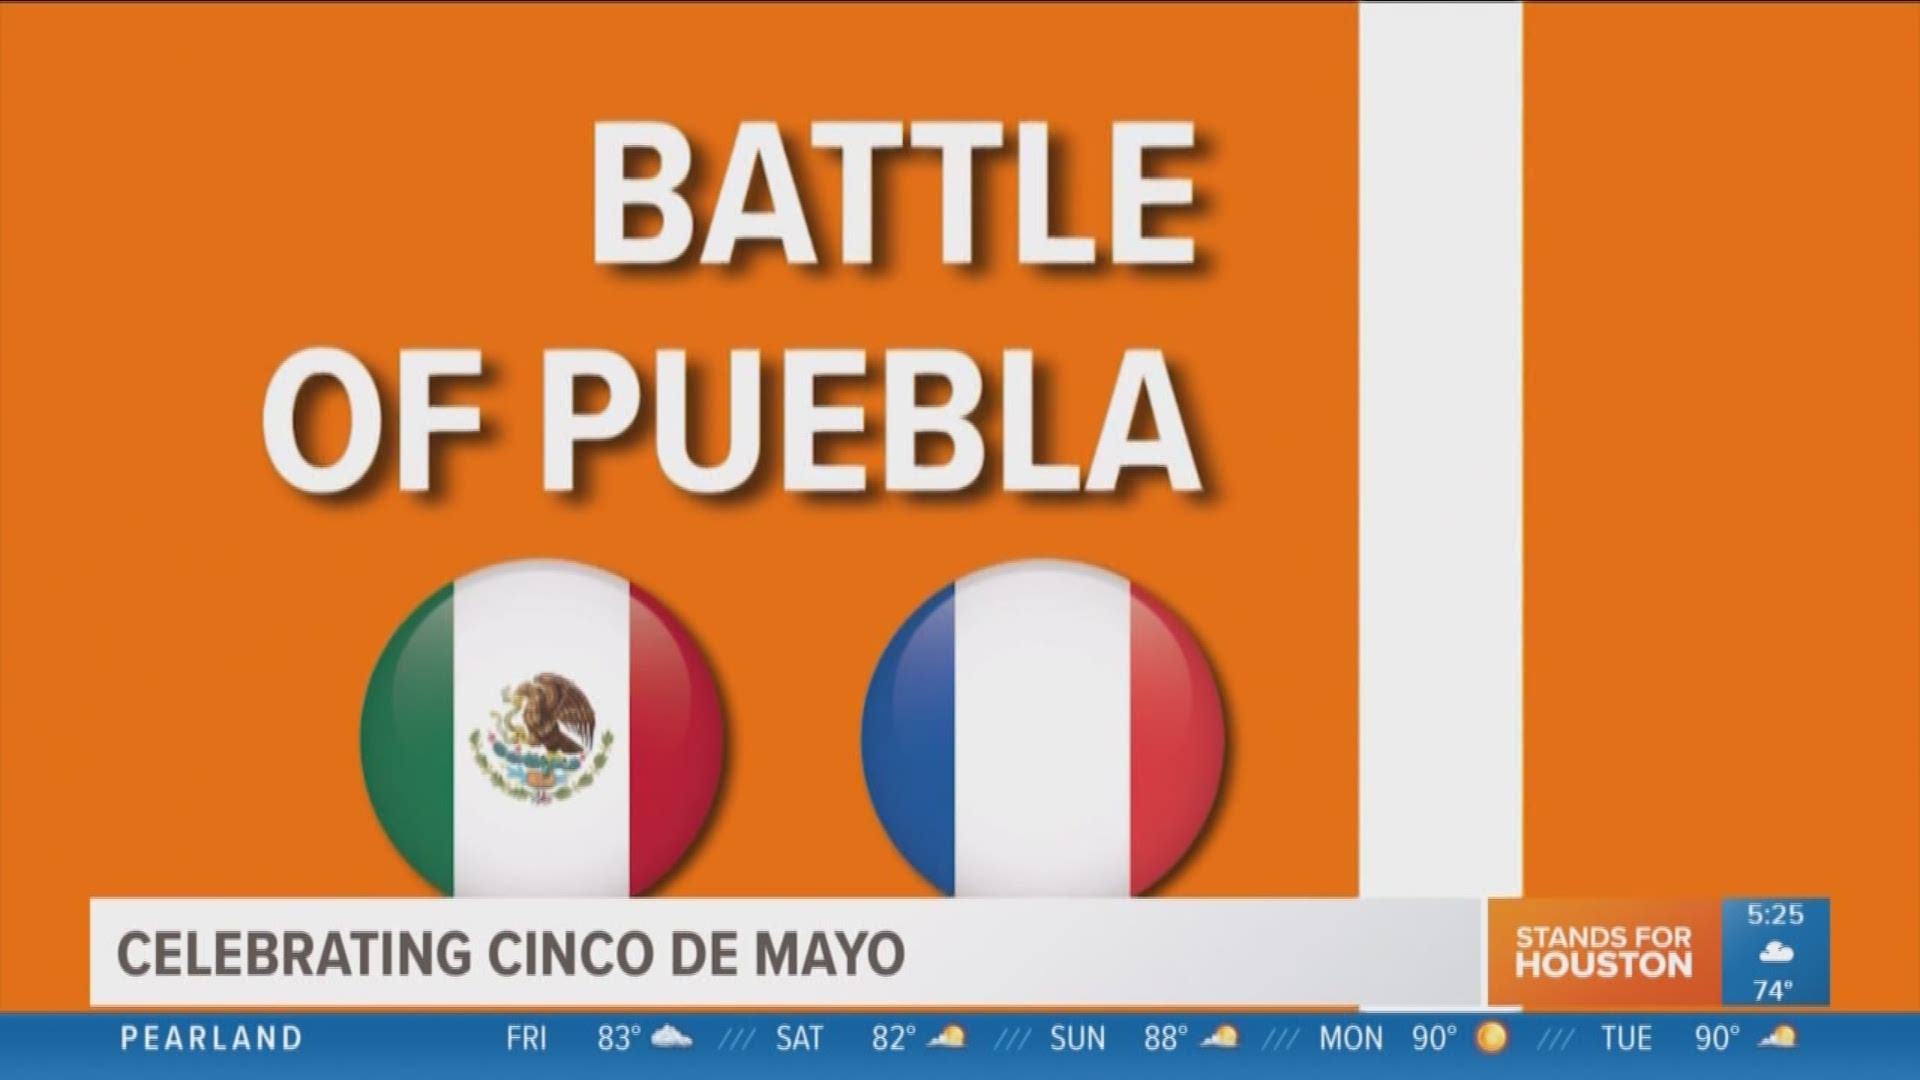 Saturday is Cinco de Mayo, but what exactly are we observing? Brandi Smith breaks it down.